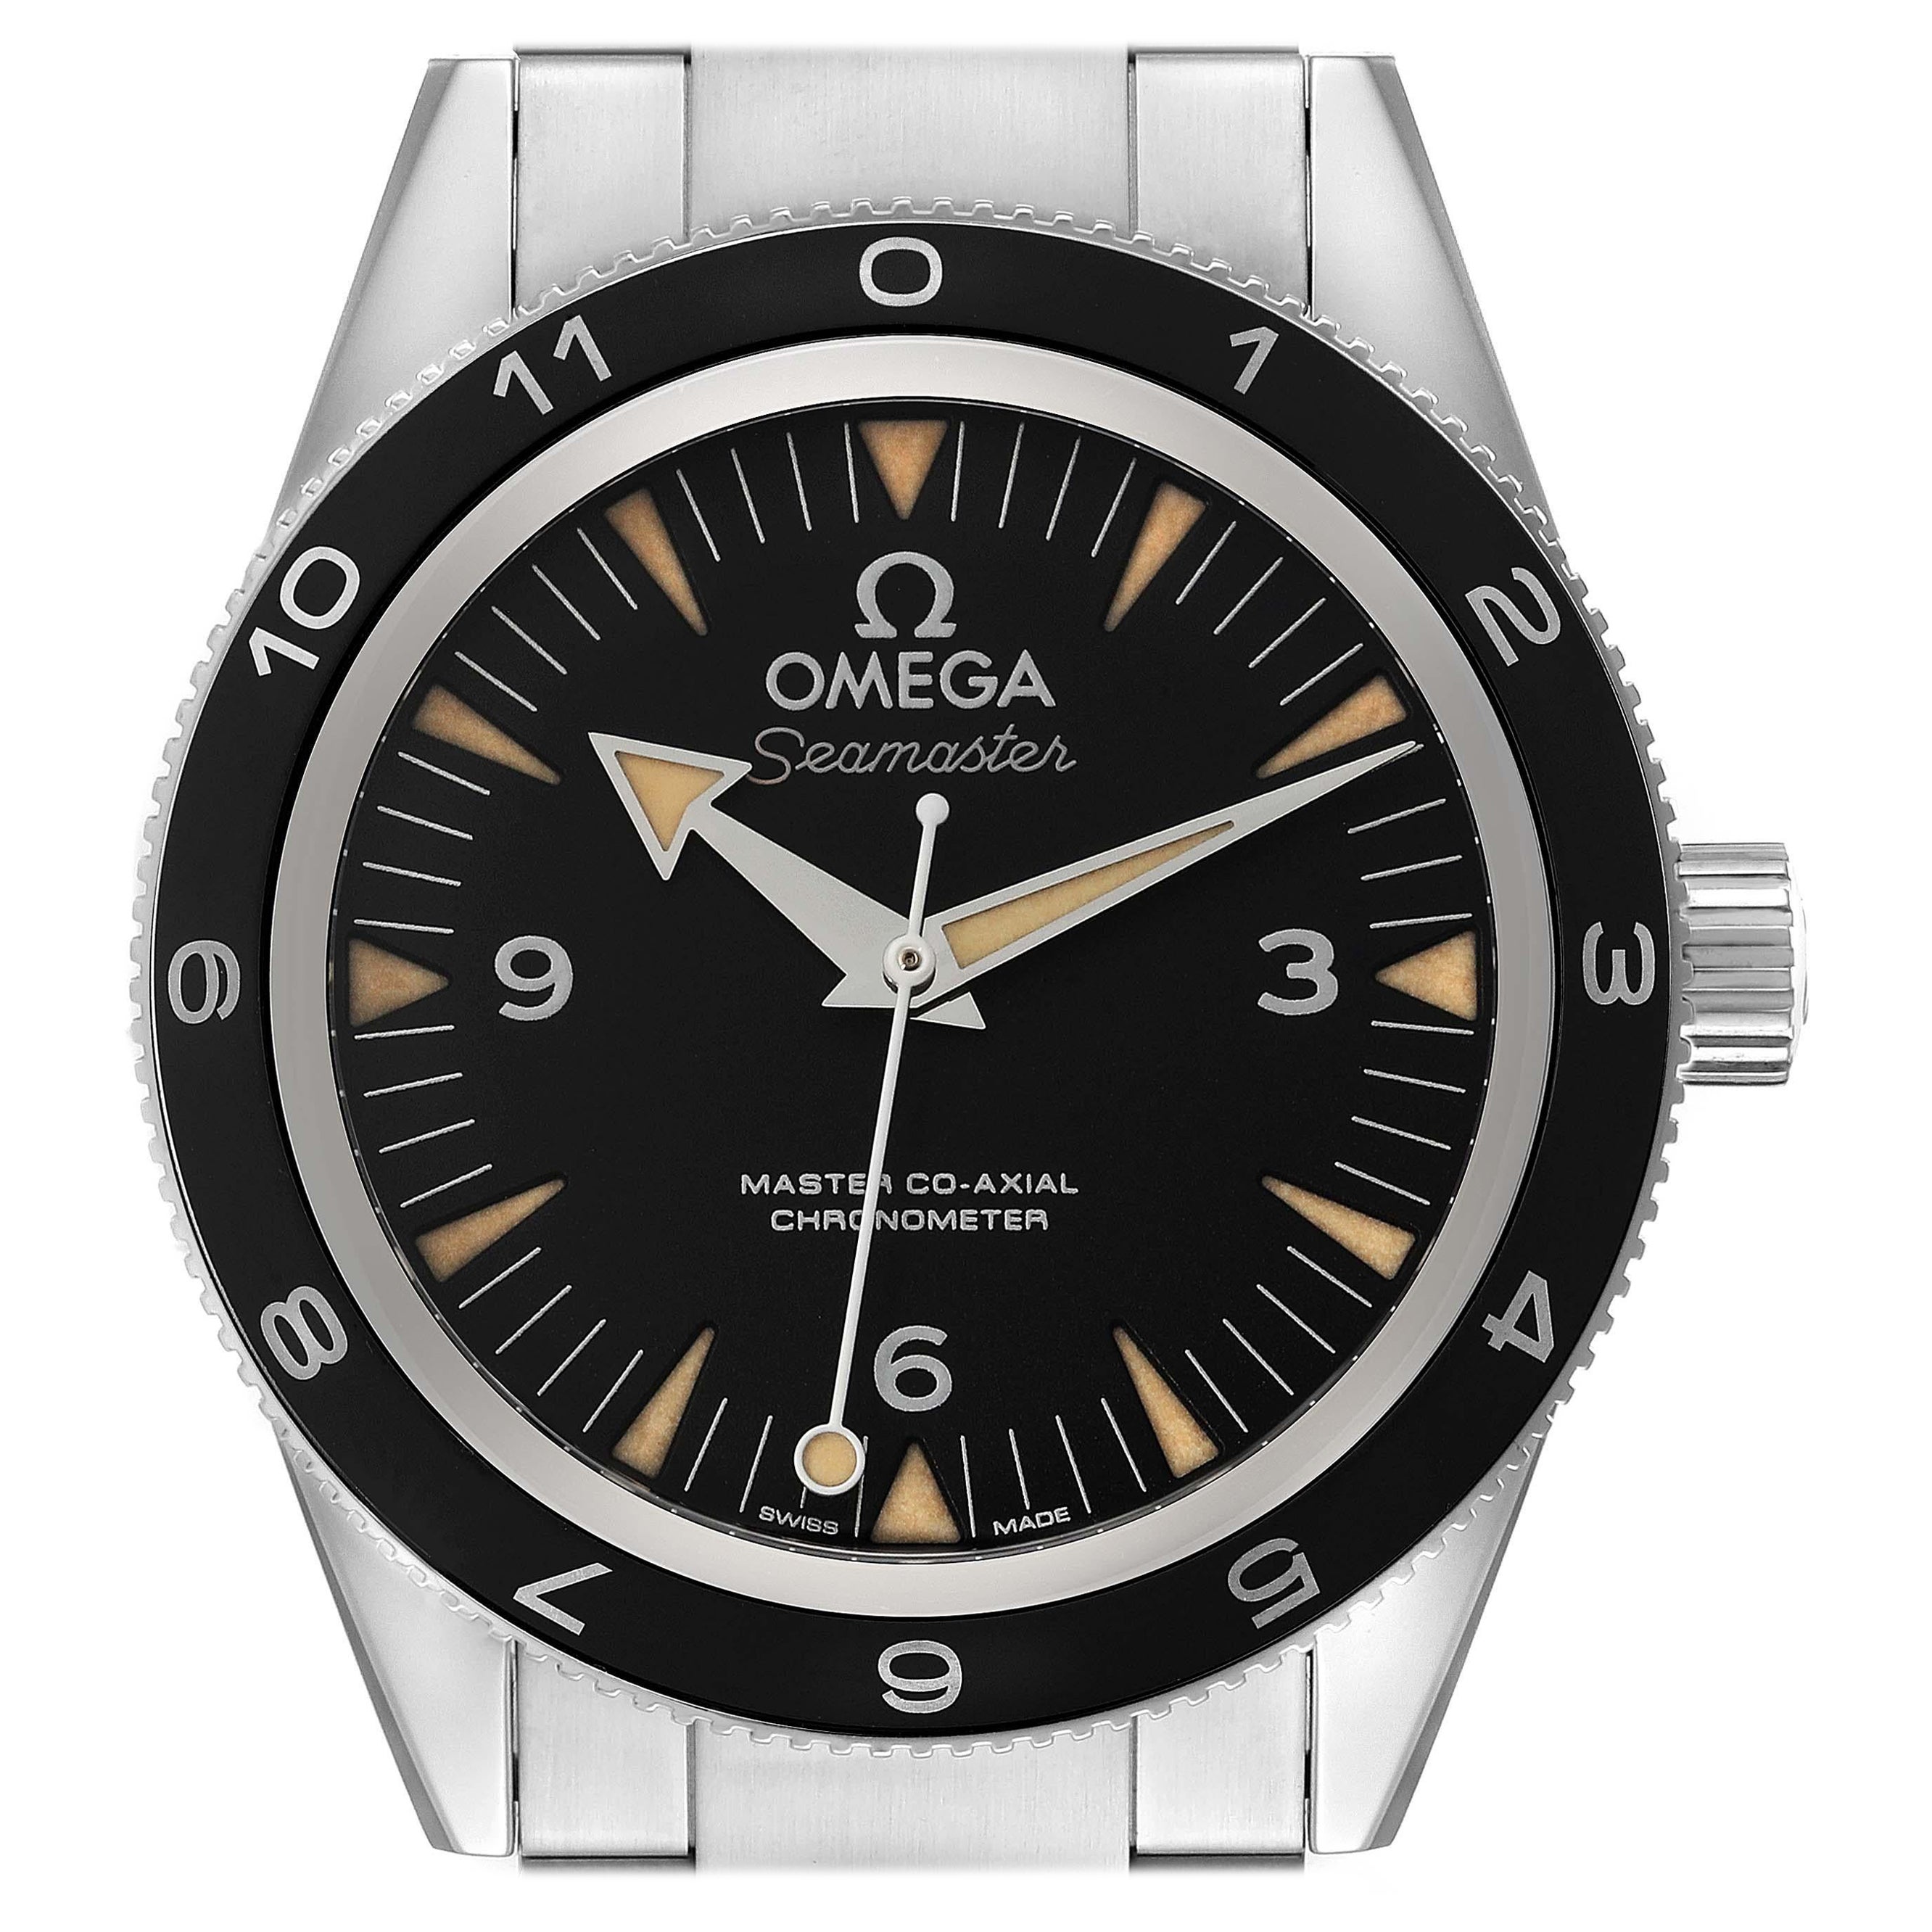 Omega Seamaster 300 Spectre LE Steel Mens Watch 233.32.41.21.01.001 Box Card